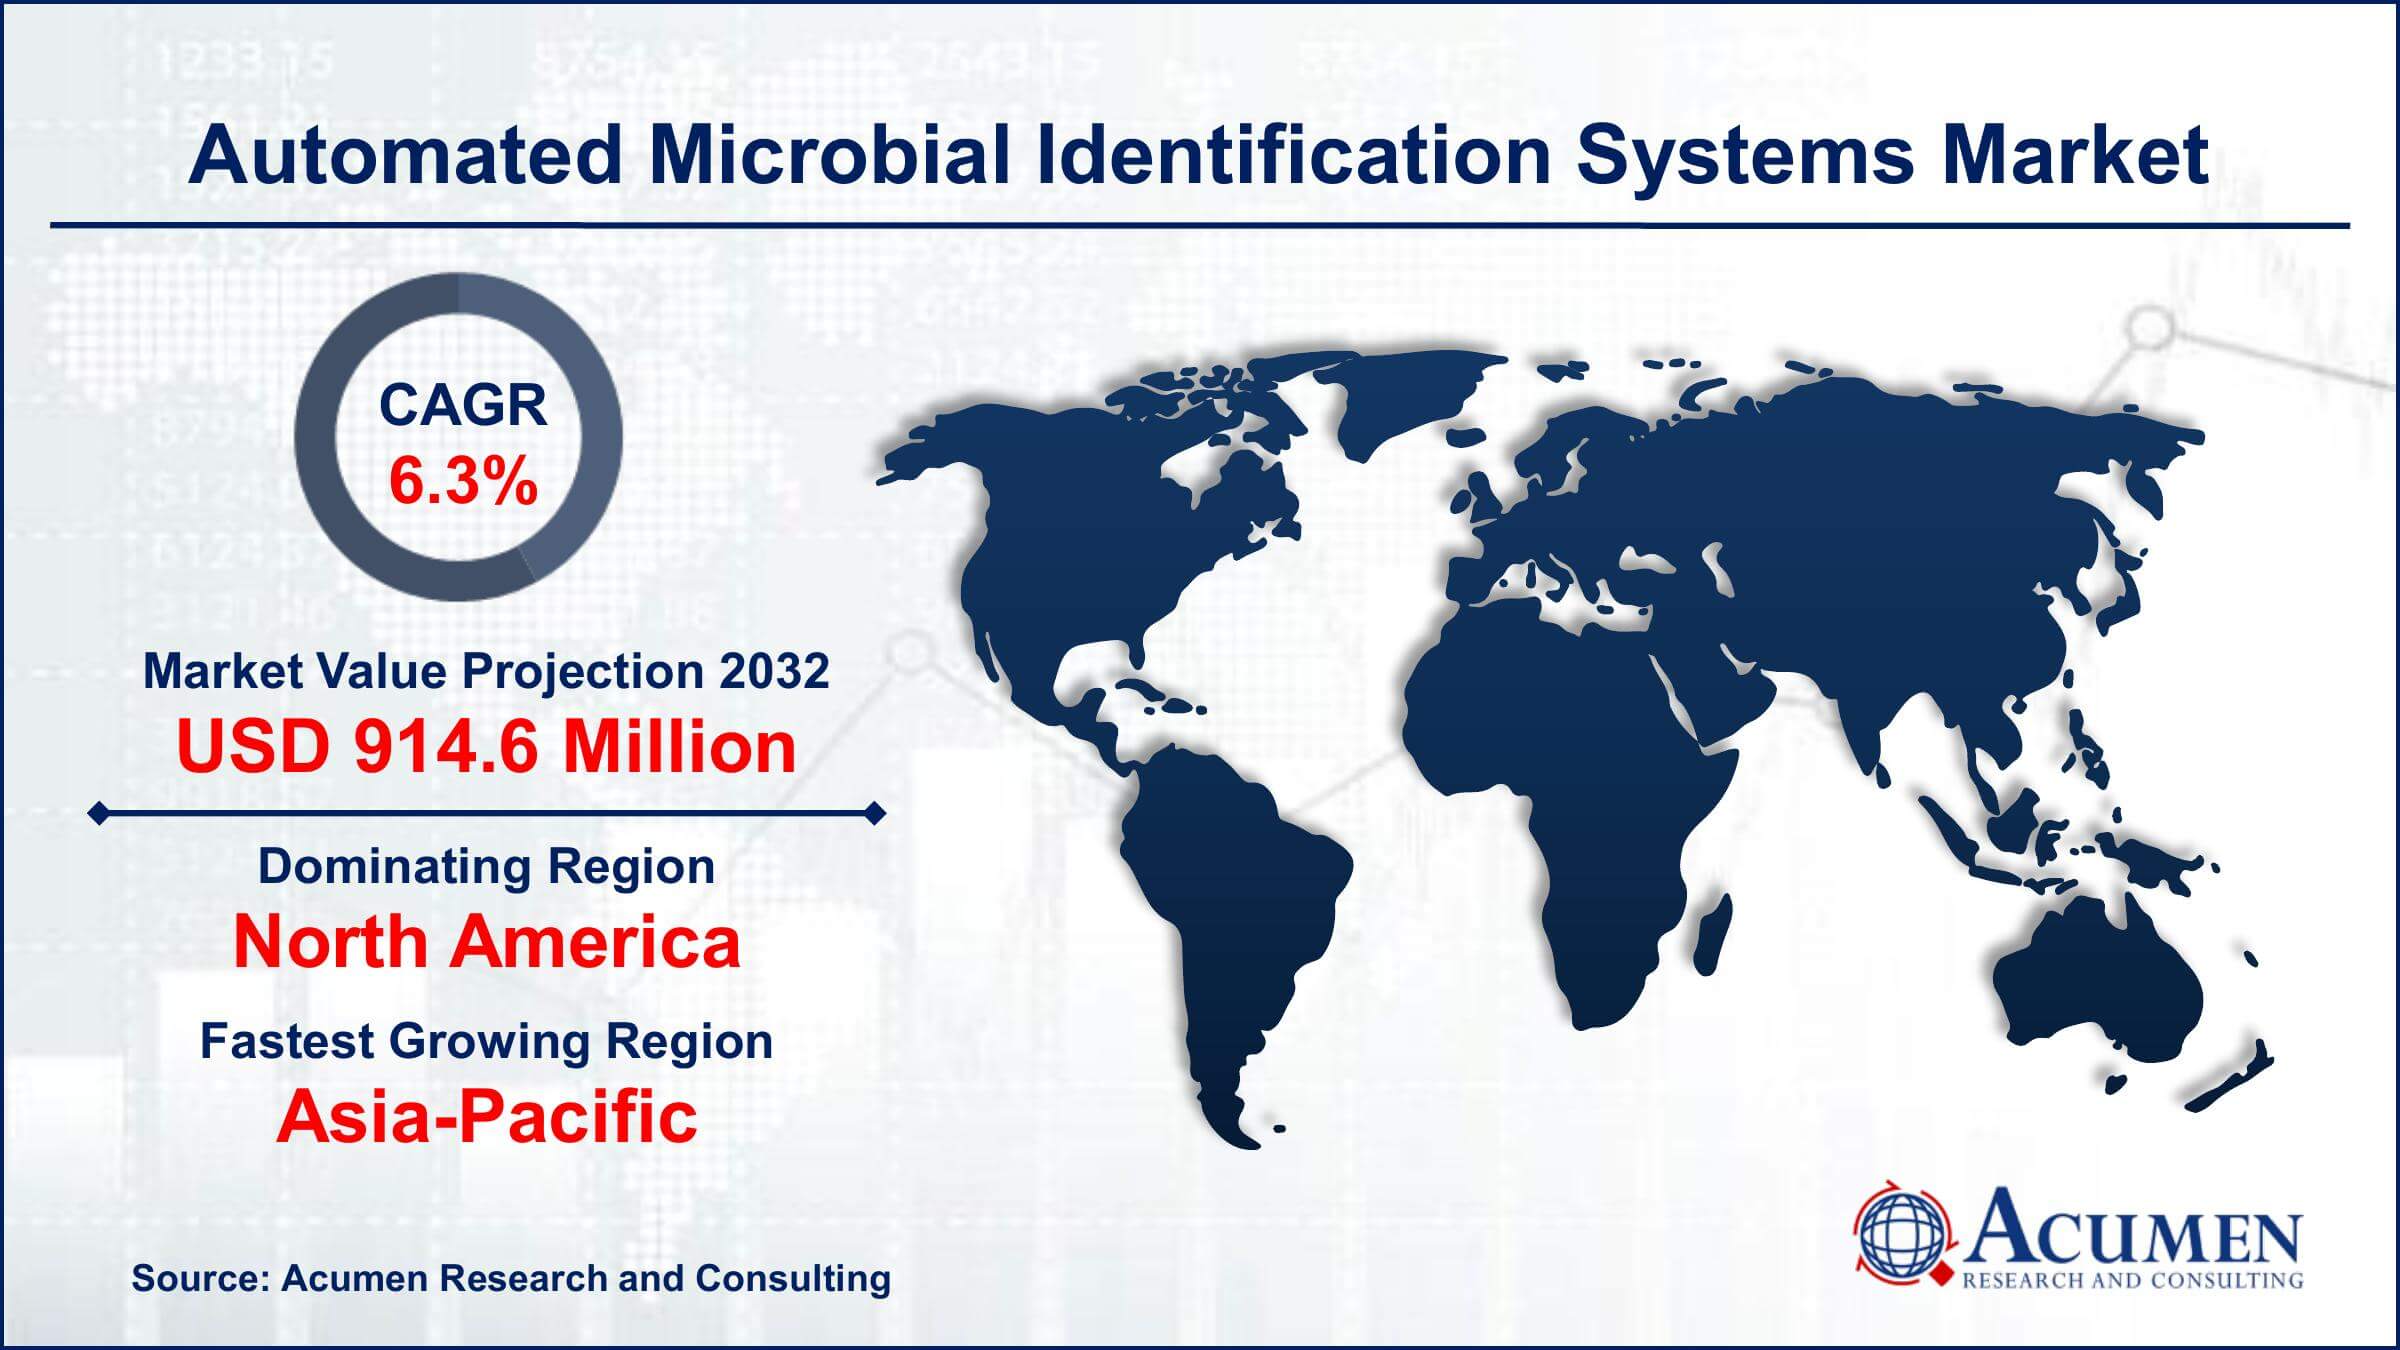 Global Automated Microbial Identification Systems Market Trends